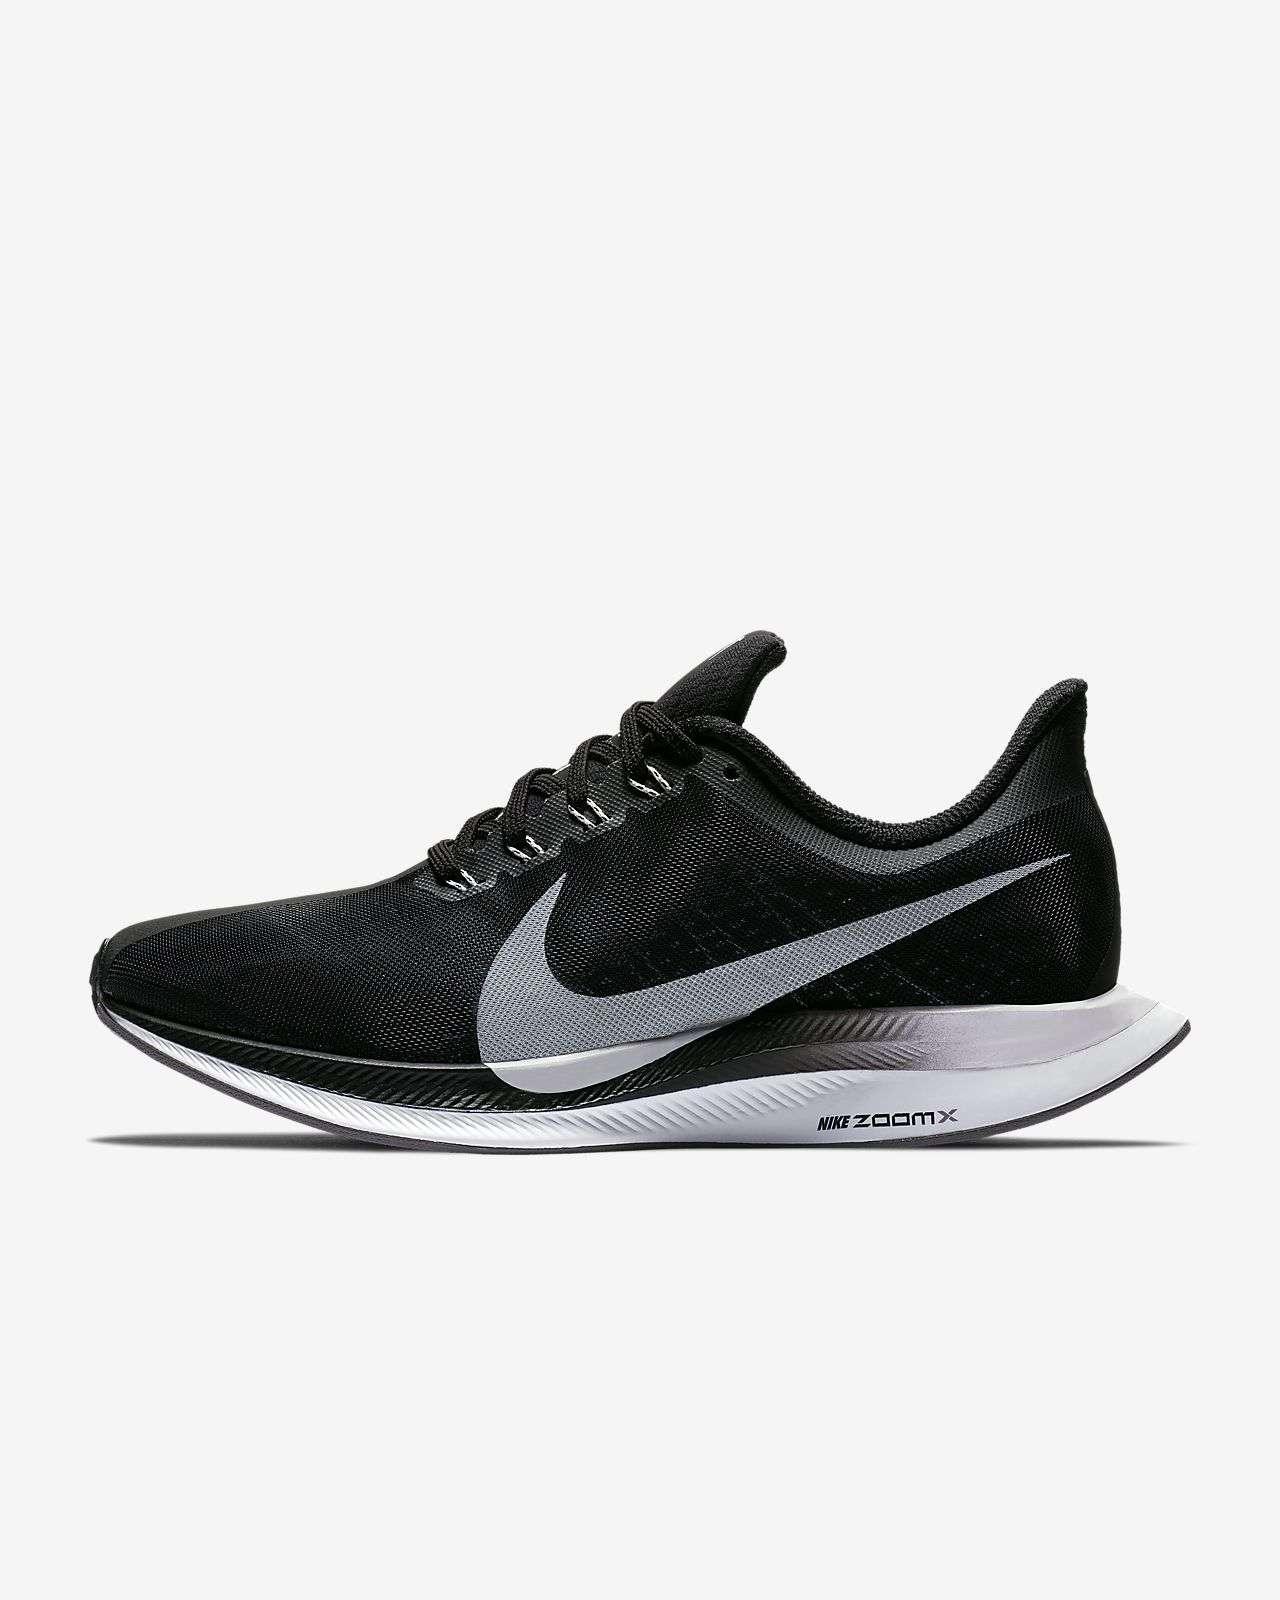 nike zoomx black and white